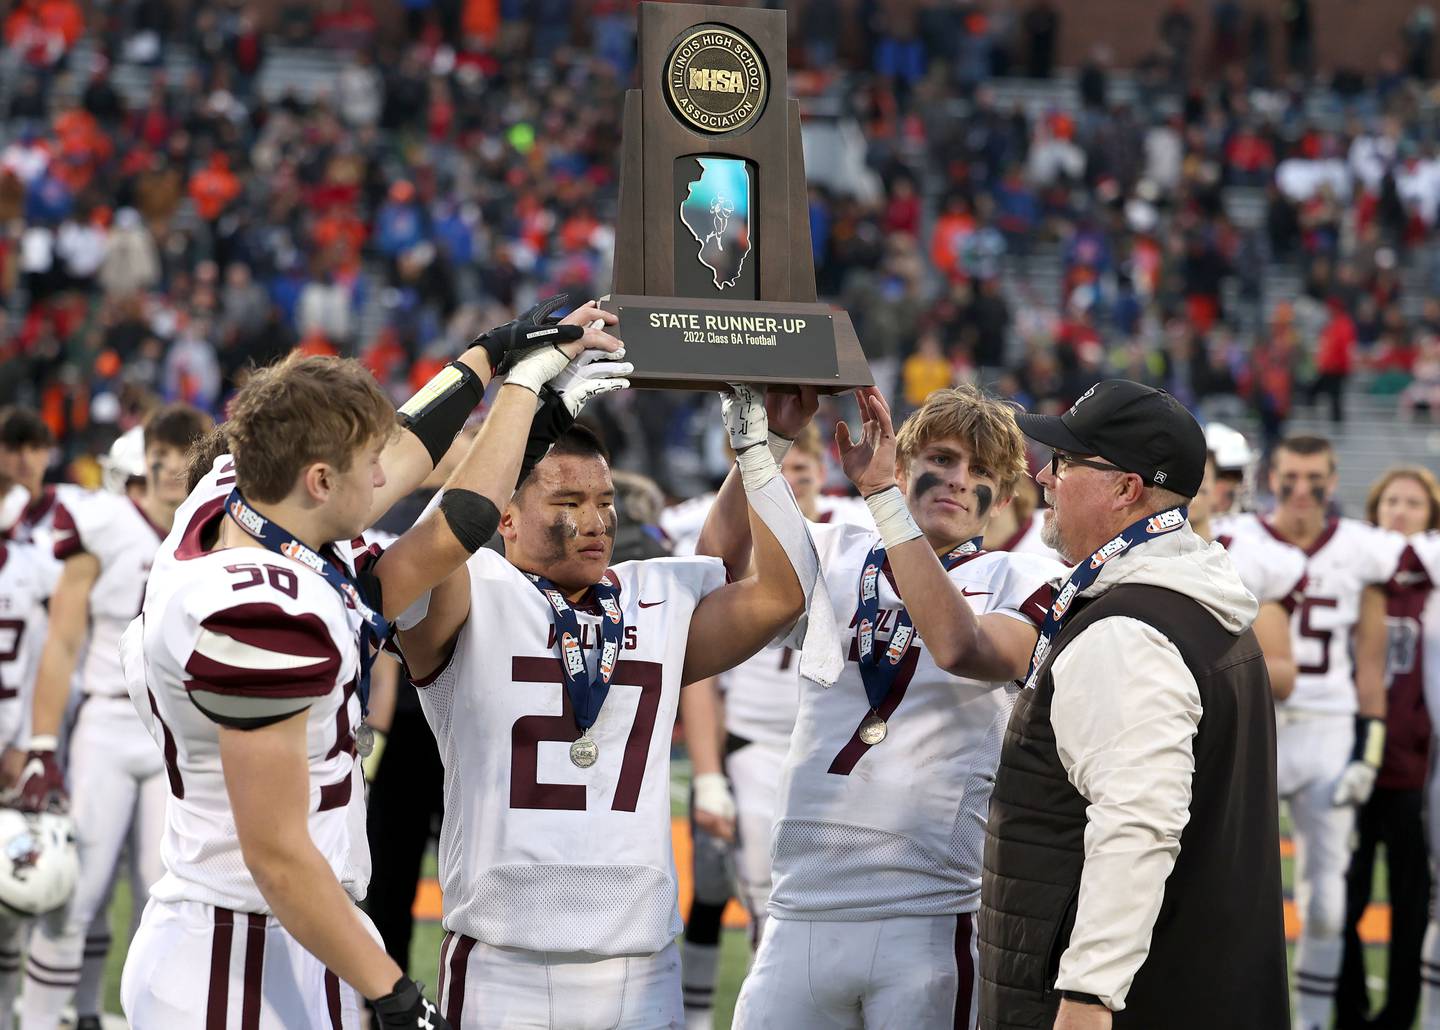 Prairie Ridge captains accept the second place trophy after their IHSA Class 6A state championship loss to East St. Louis Saturday, Nov. 26, 2022, in Memorial Stadium at the University of Illinois in Champaign.